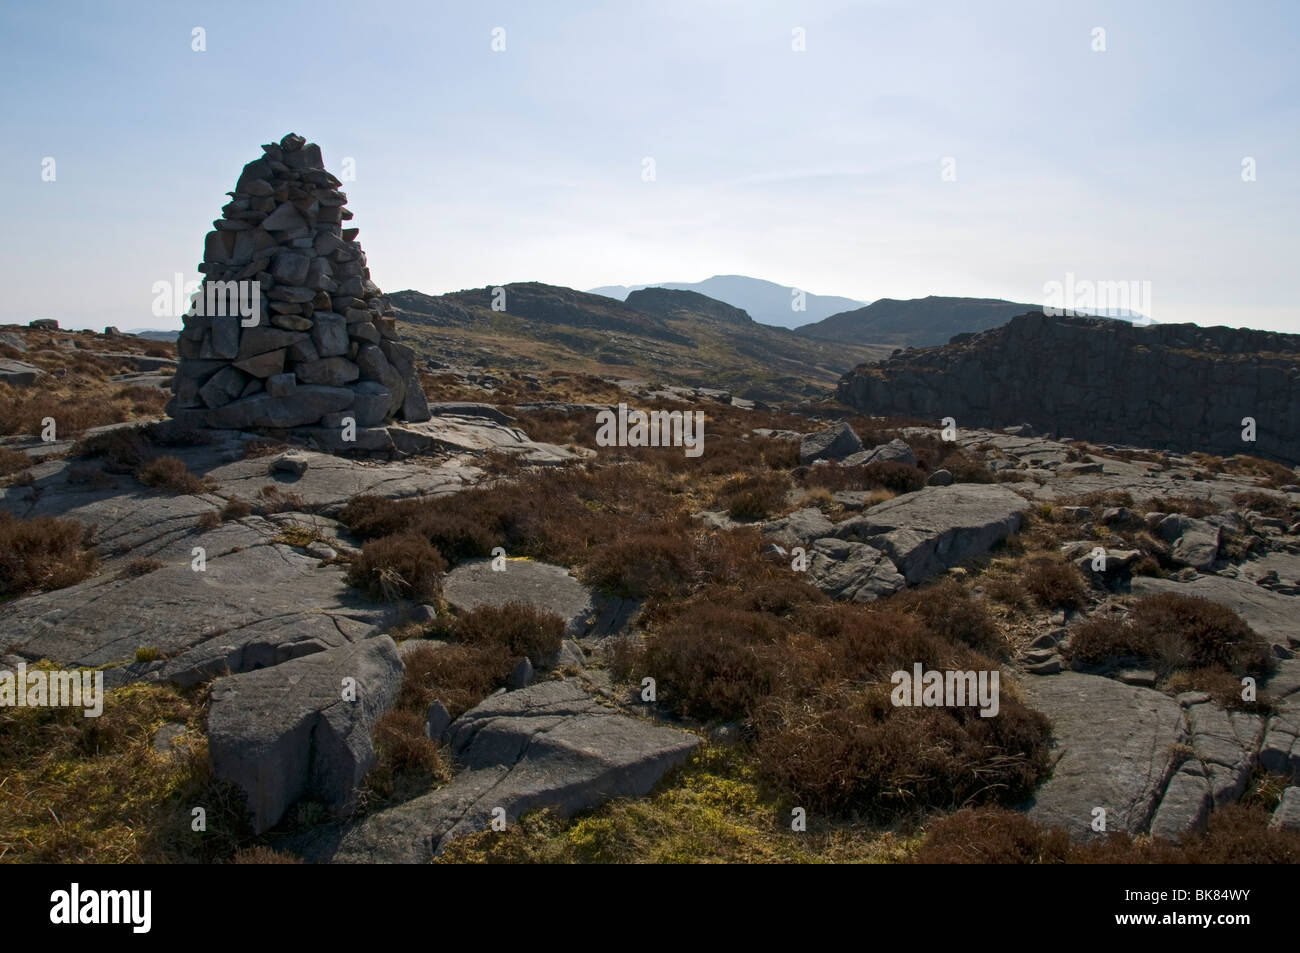 A cairn on the Rhinog Mountains, Snowdonia, North Wales, UK Stock Photo